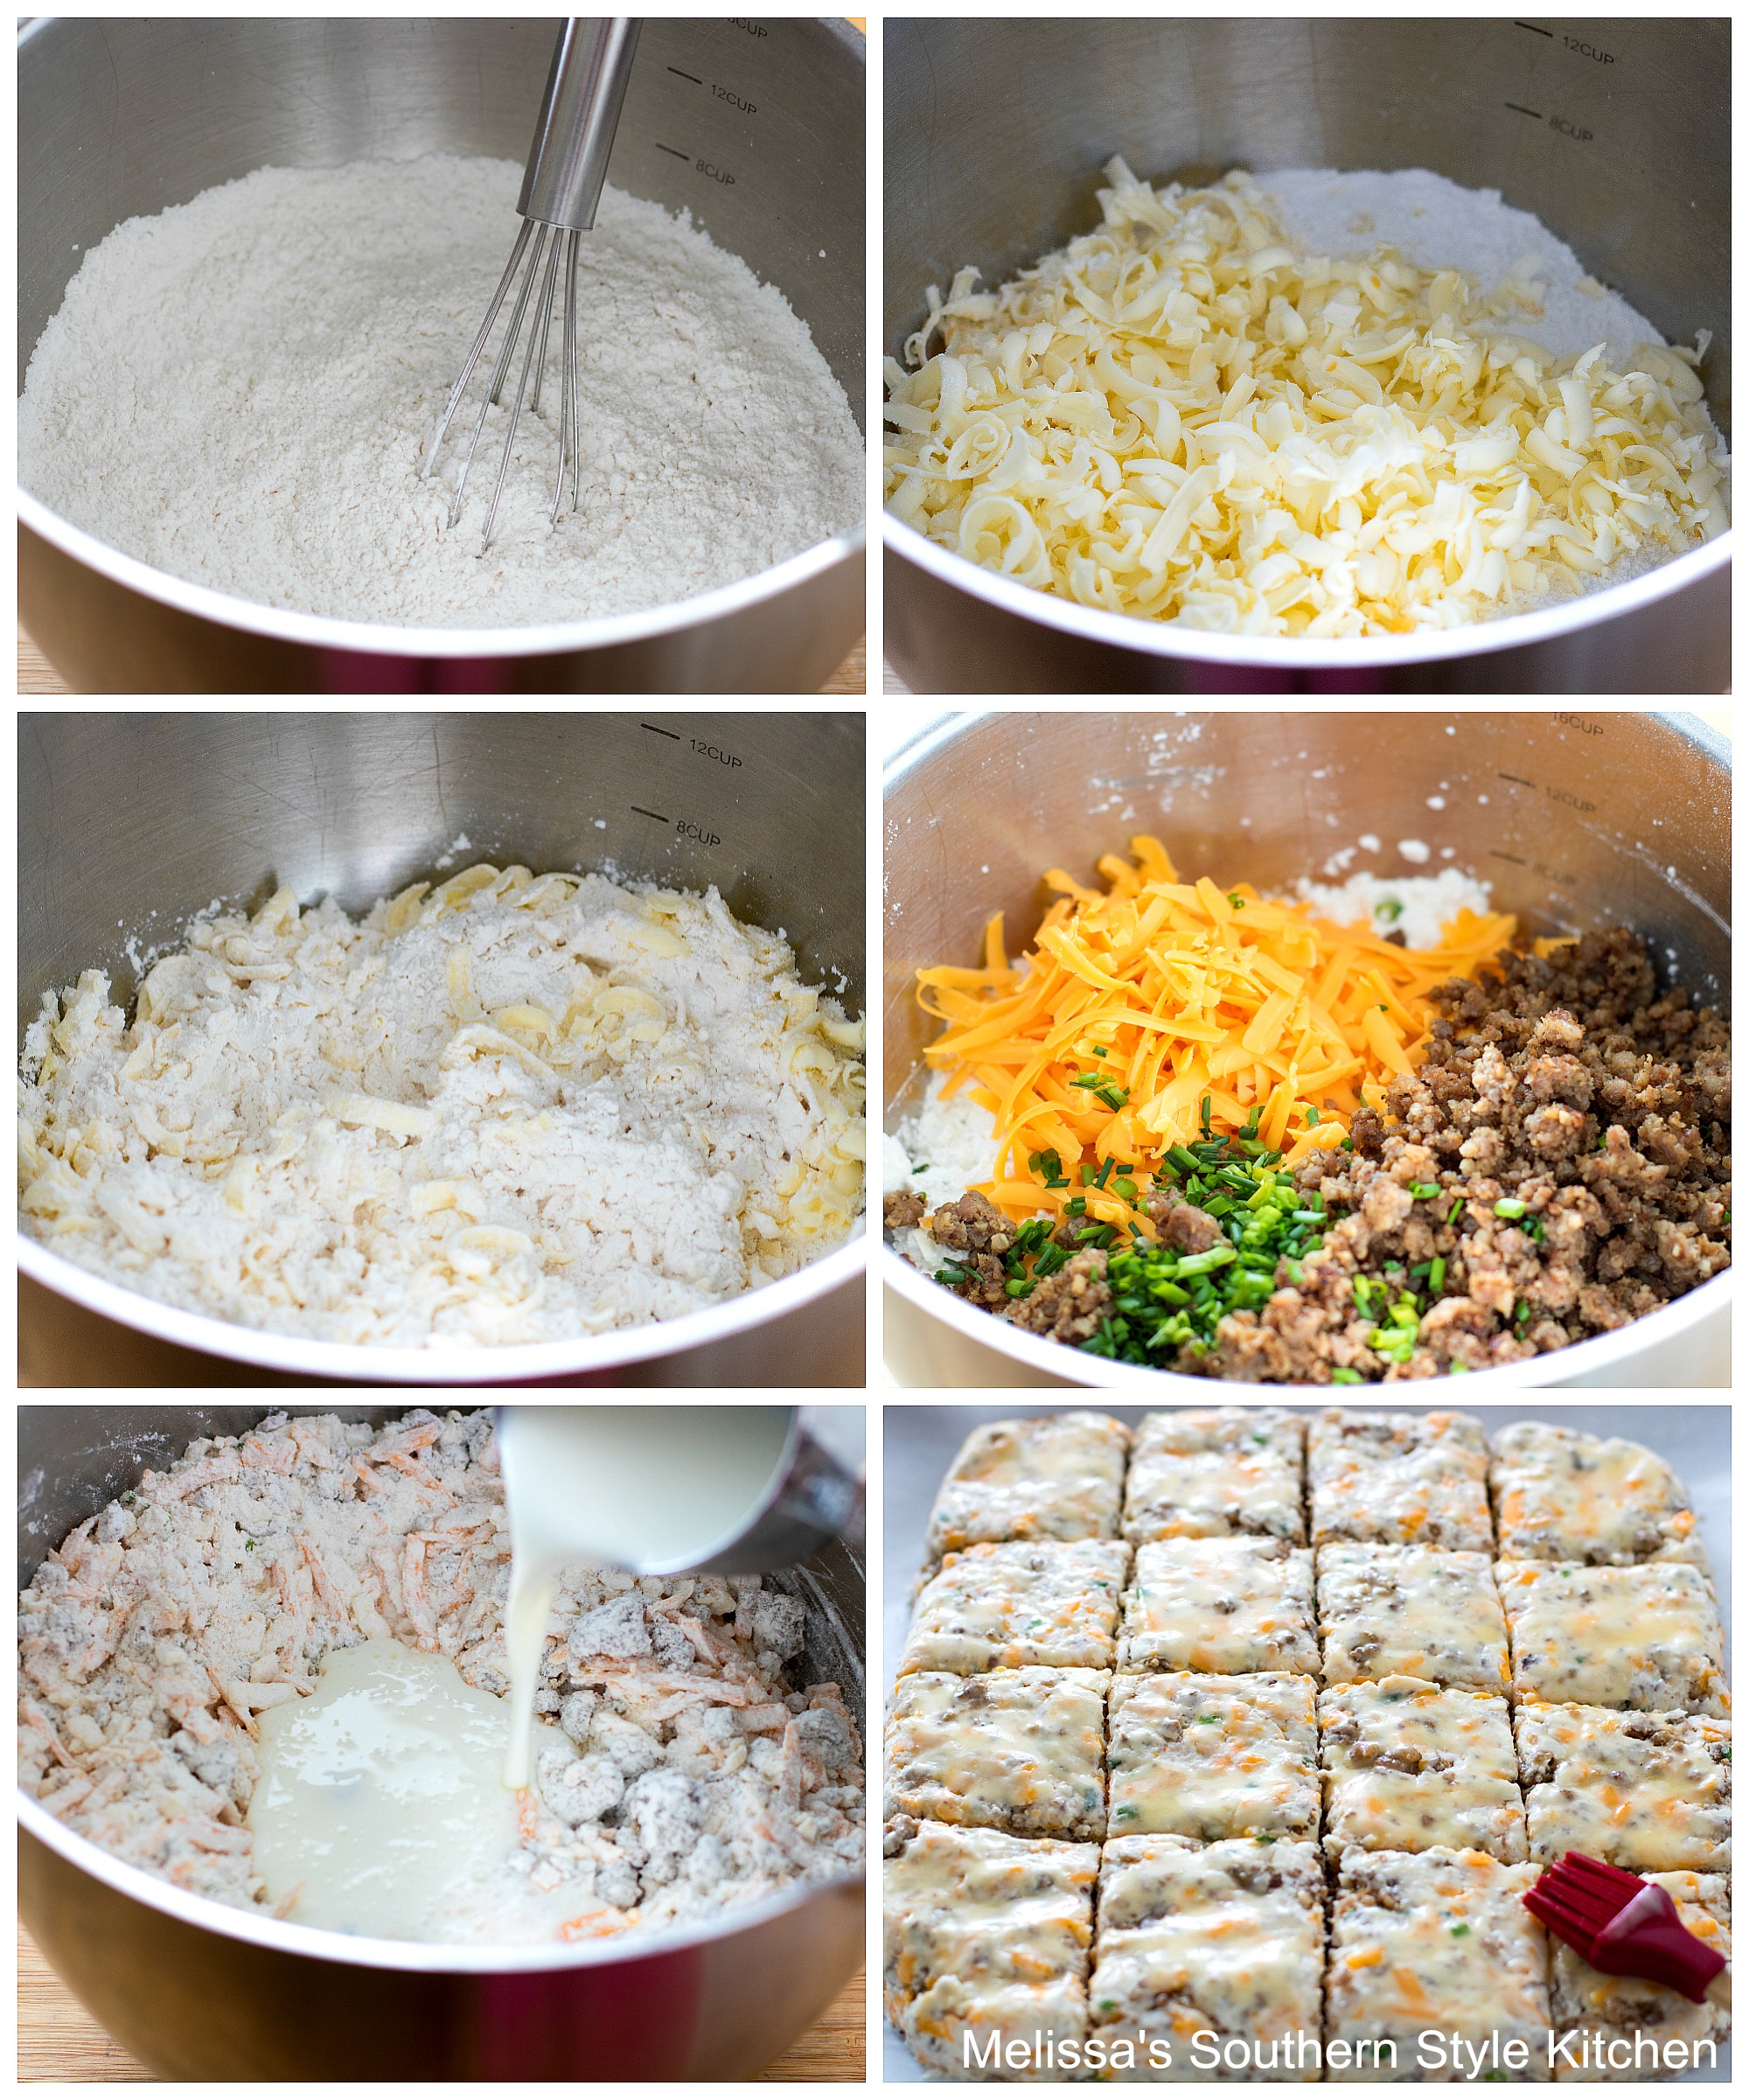 Step-by-step images and ingredients for Cheddar Sausage Biscuits